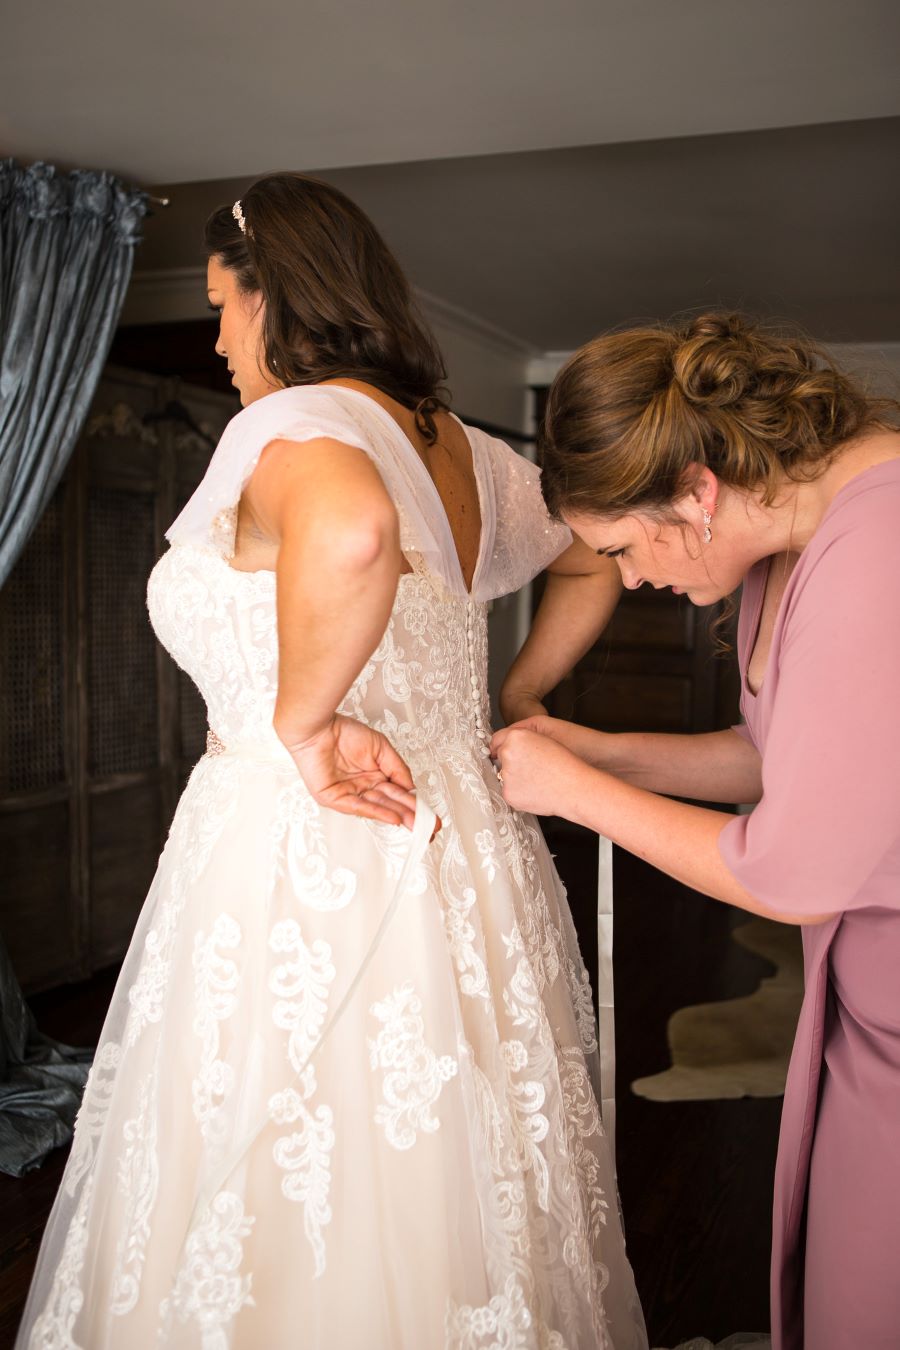 Bride being buttoned into lace wedding dress before her garden ceremony / Romantic / Summer / September / Pink / Dusty Rose / Cream